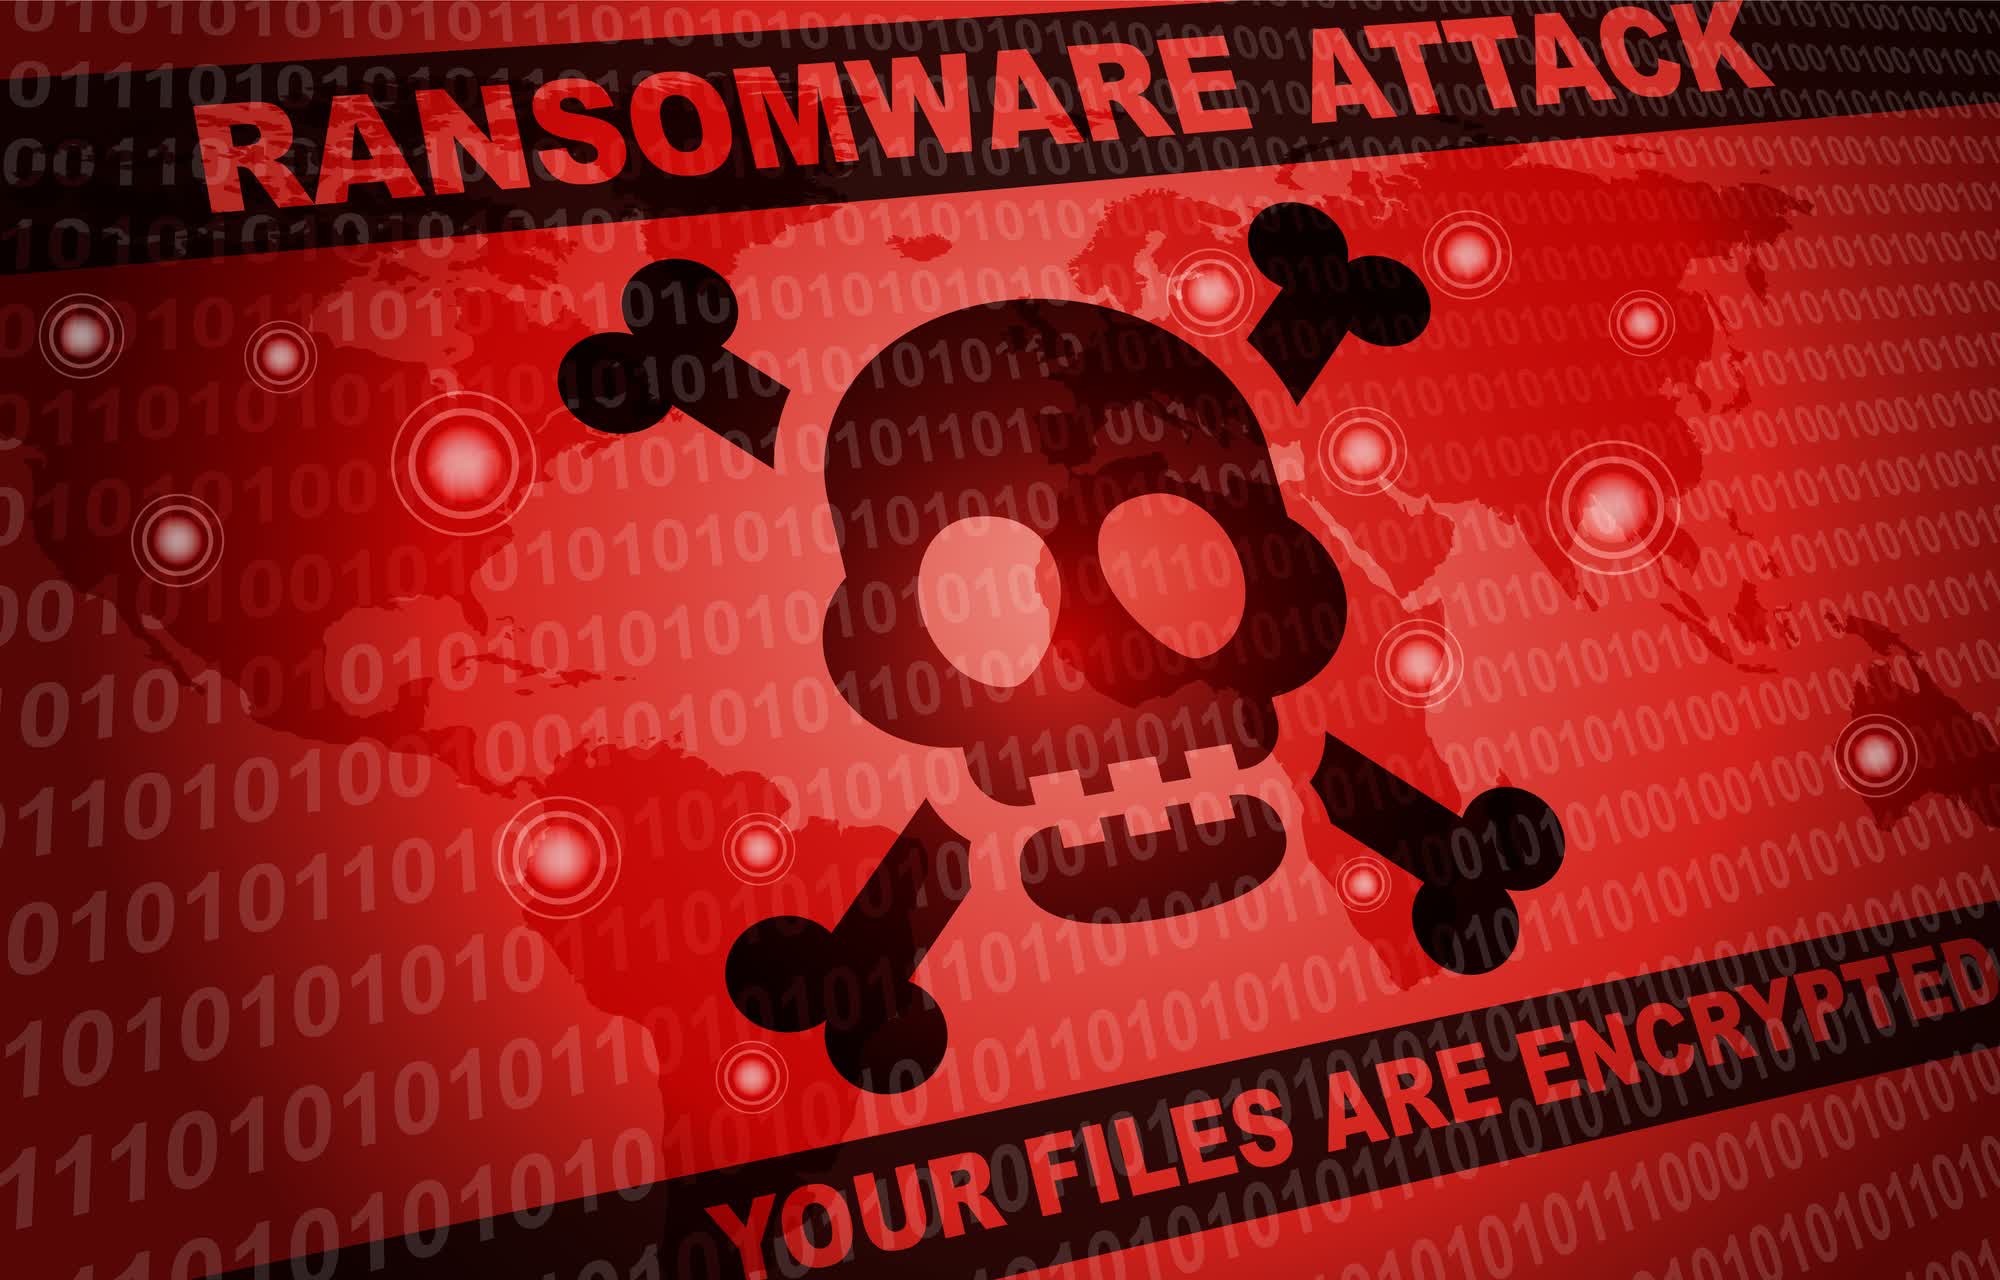 The US government is offering $10 million for tips about Cl0p ransomware